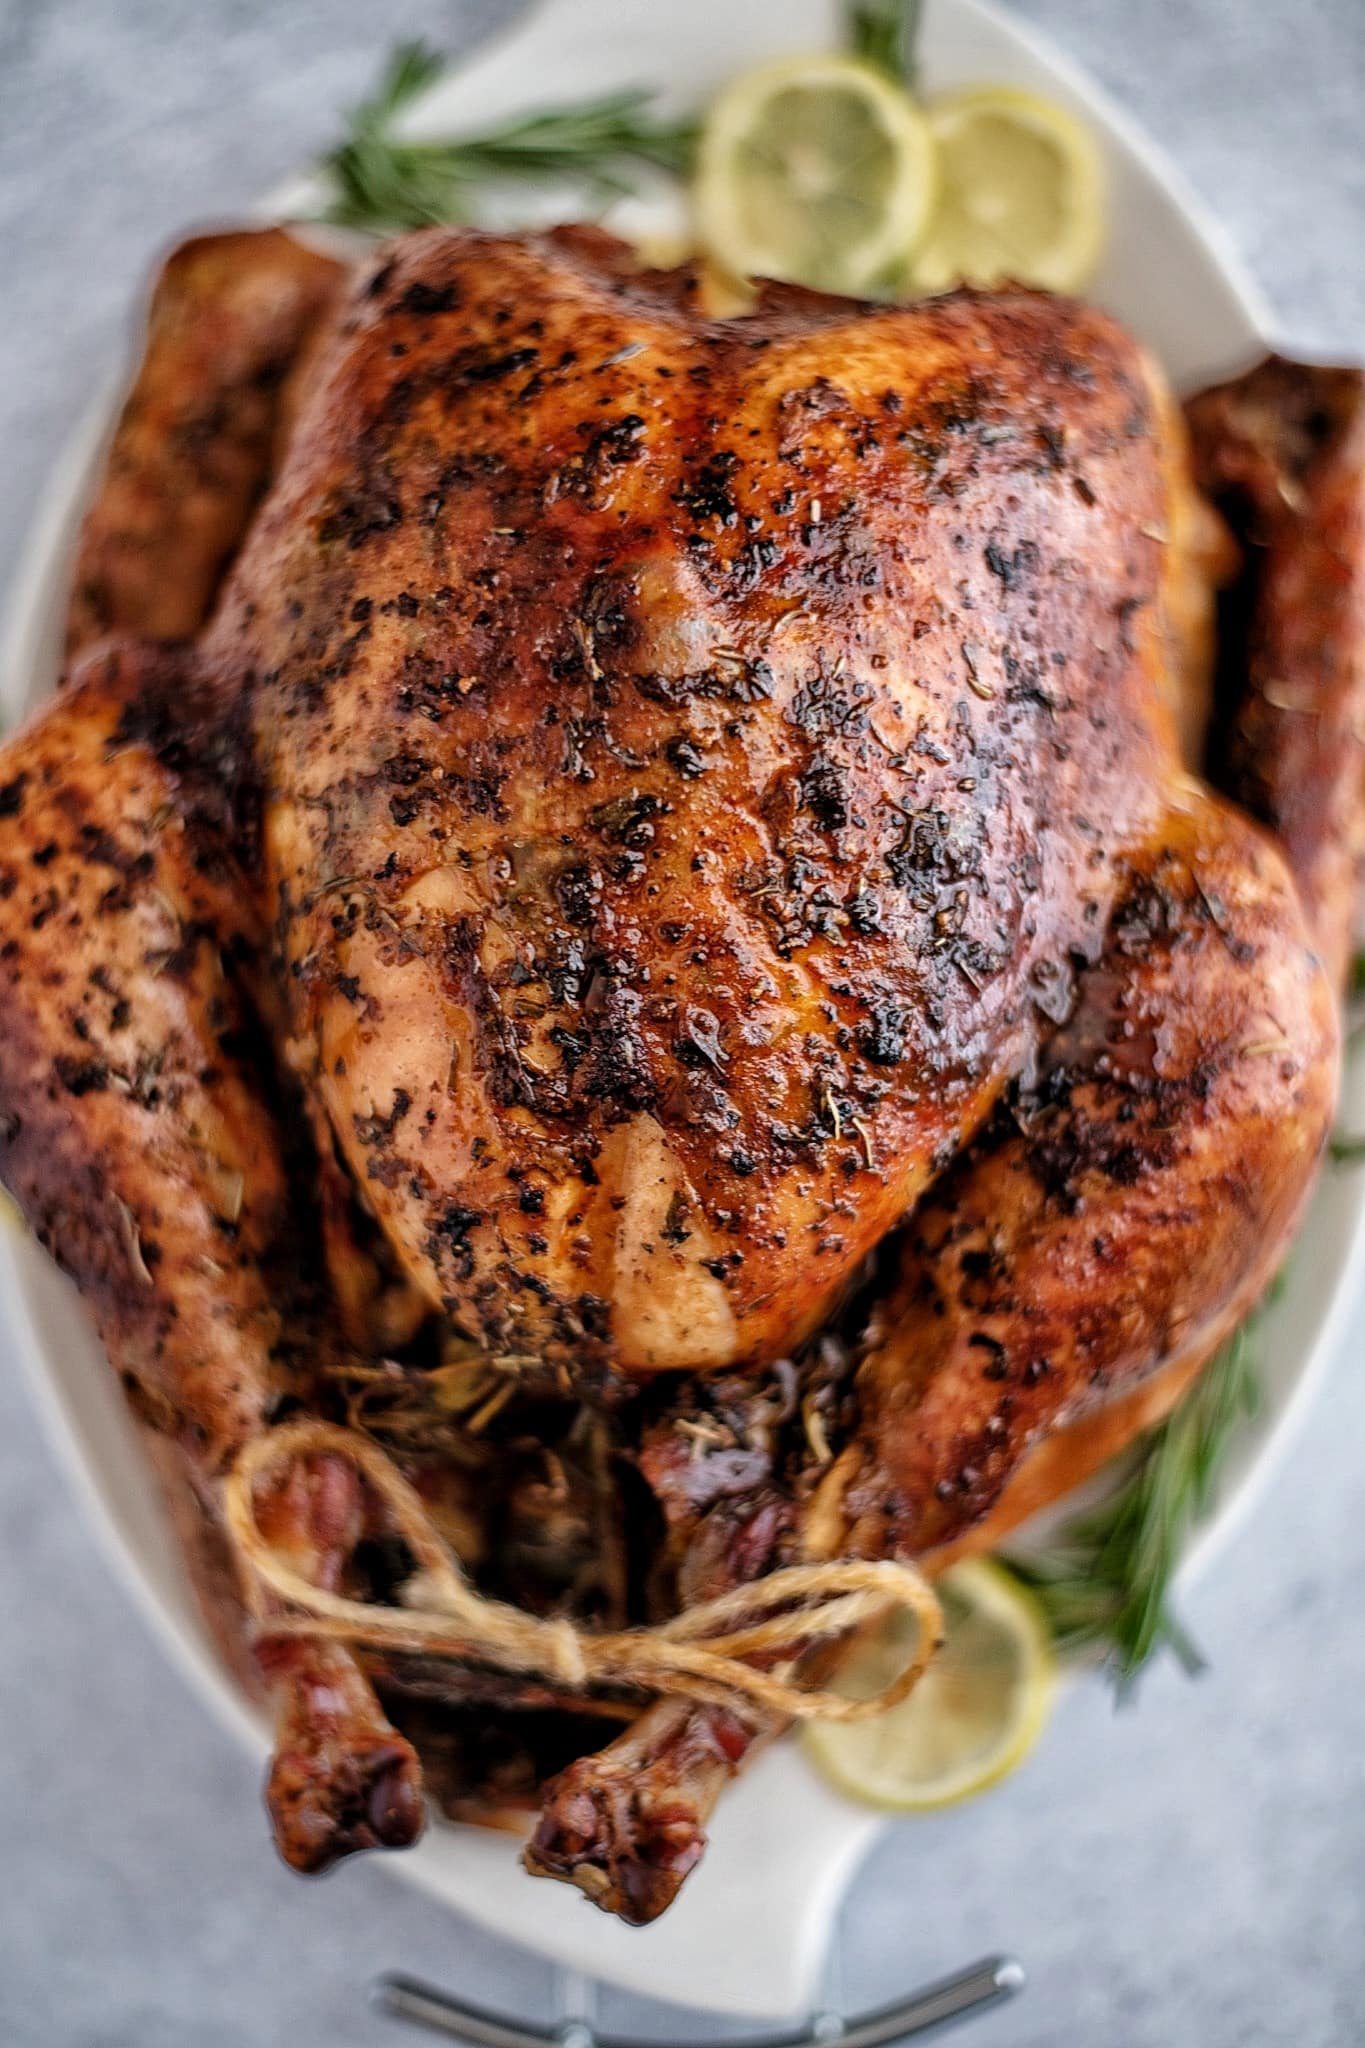 Cajun Butter Roasted Turkey garnish with rosemary and limewheel